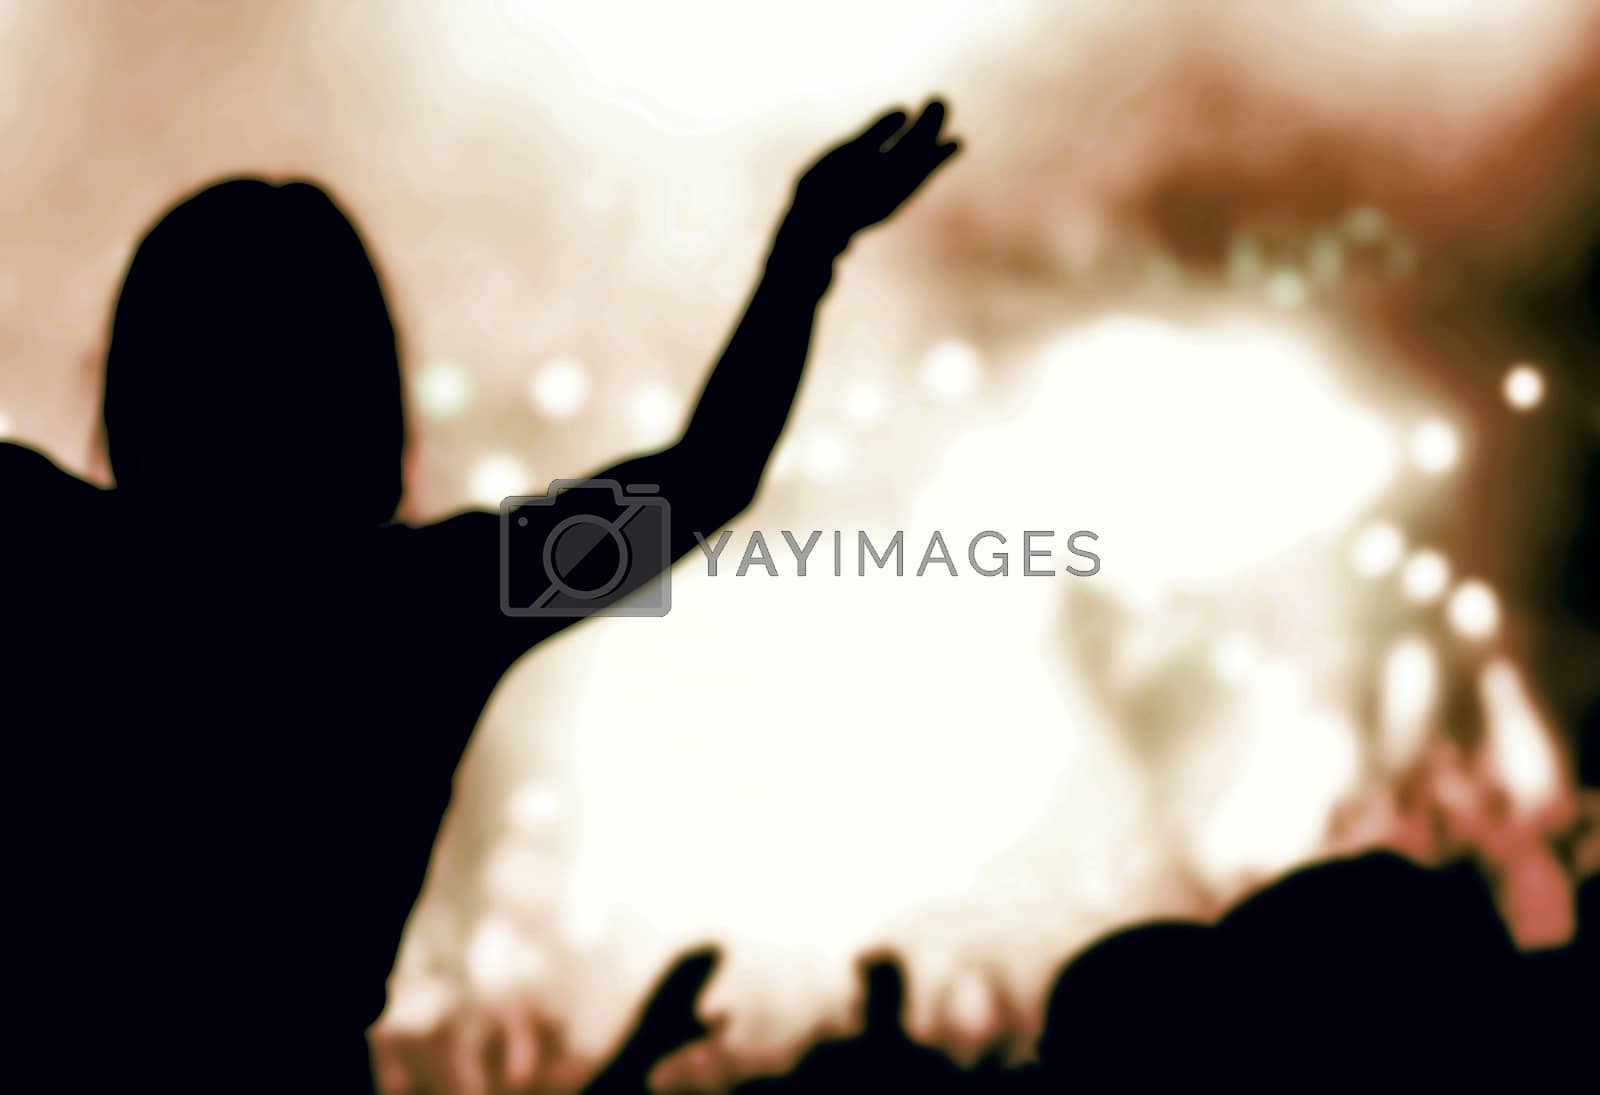 Royalty free image of crowed by davincidig